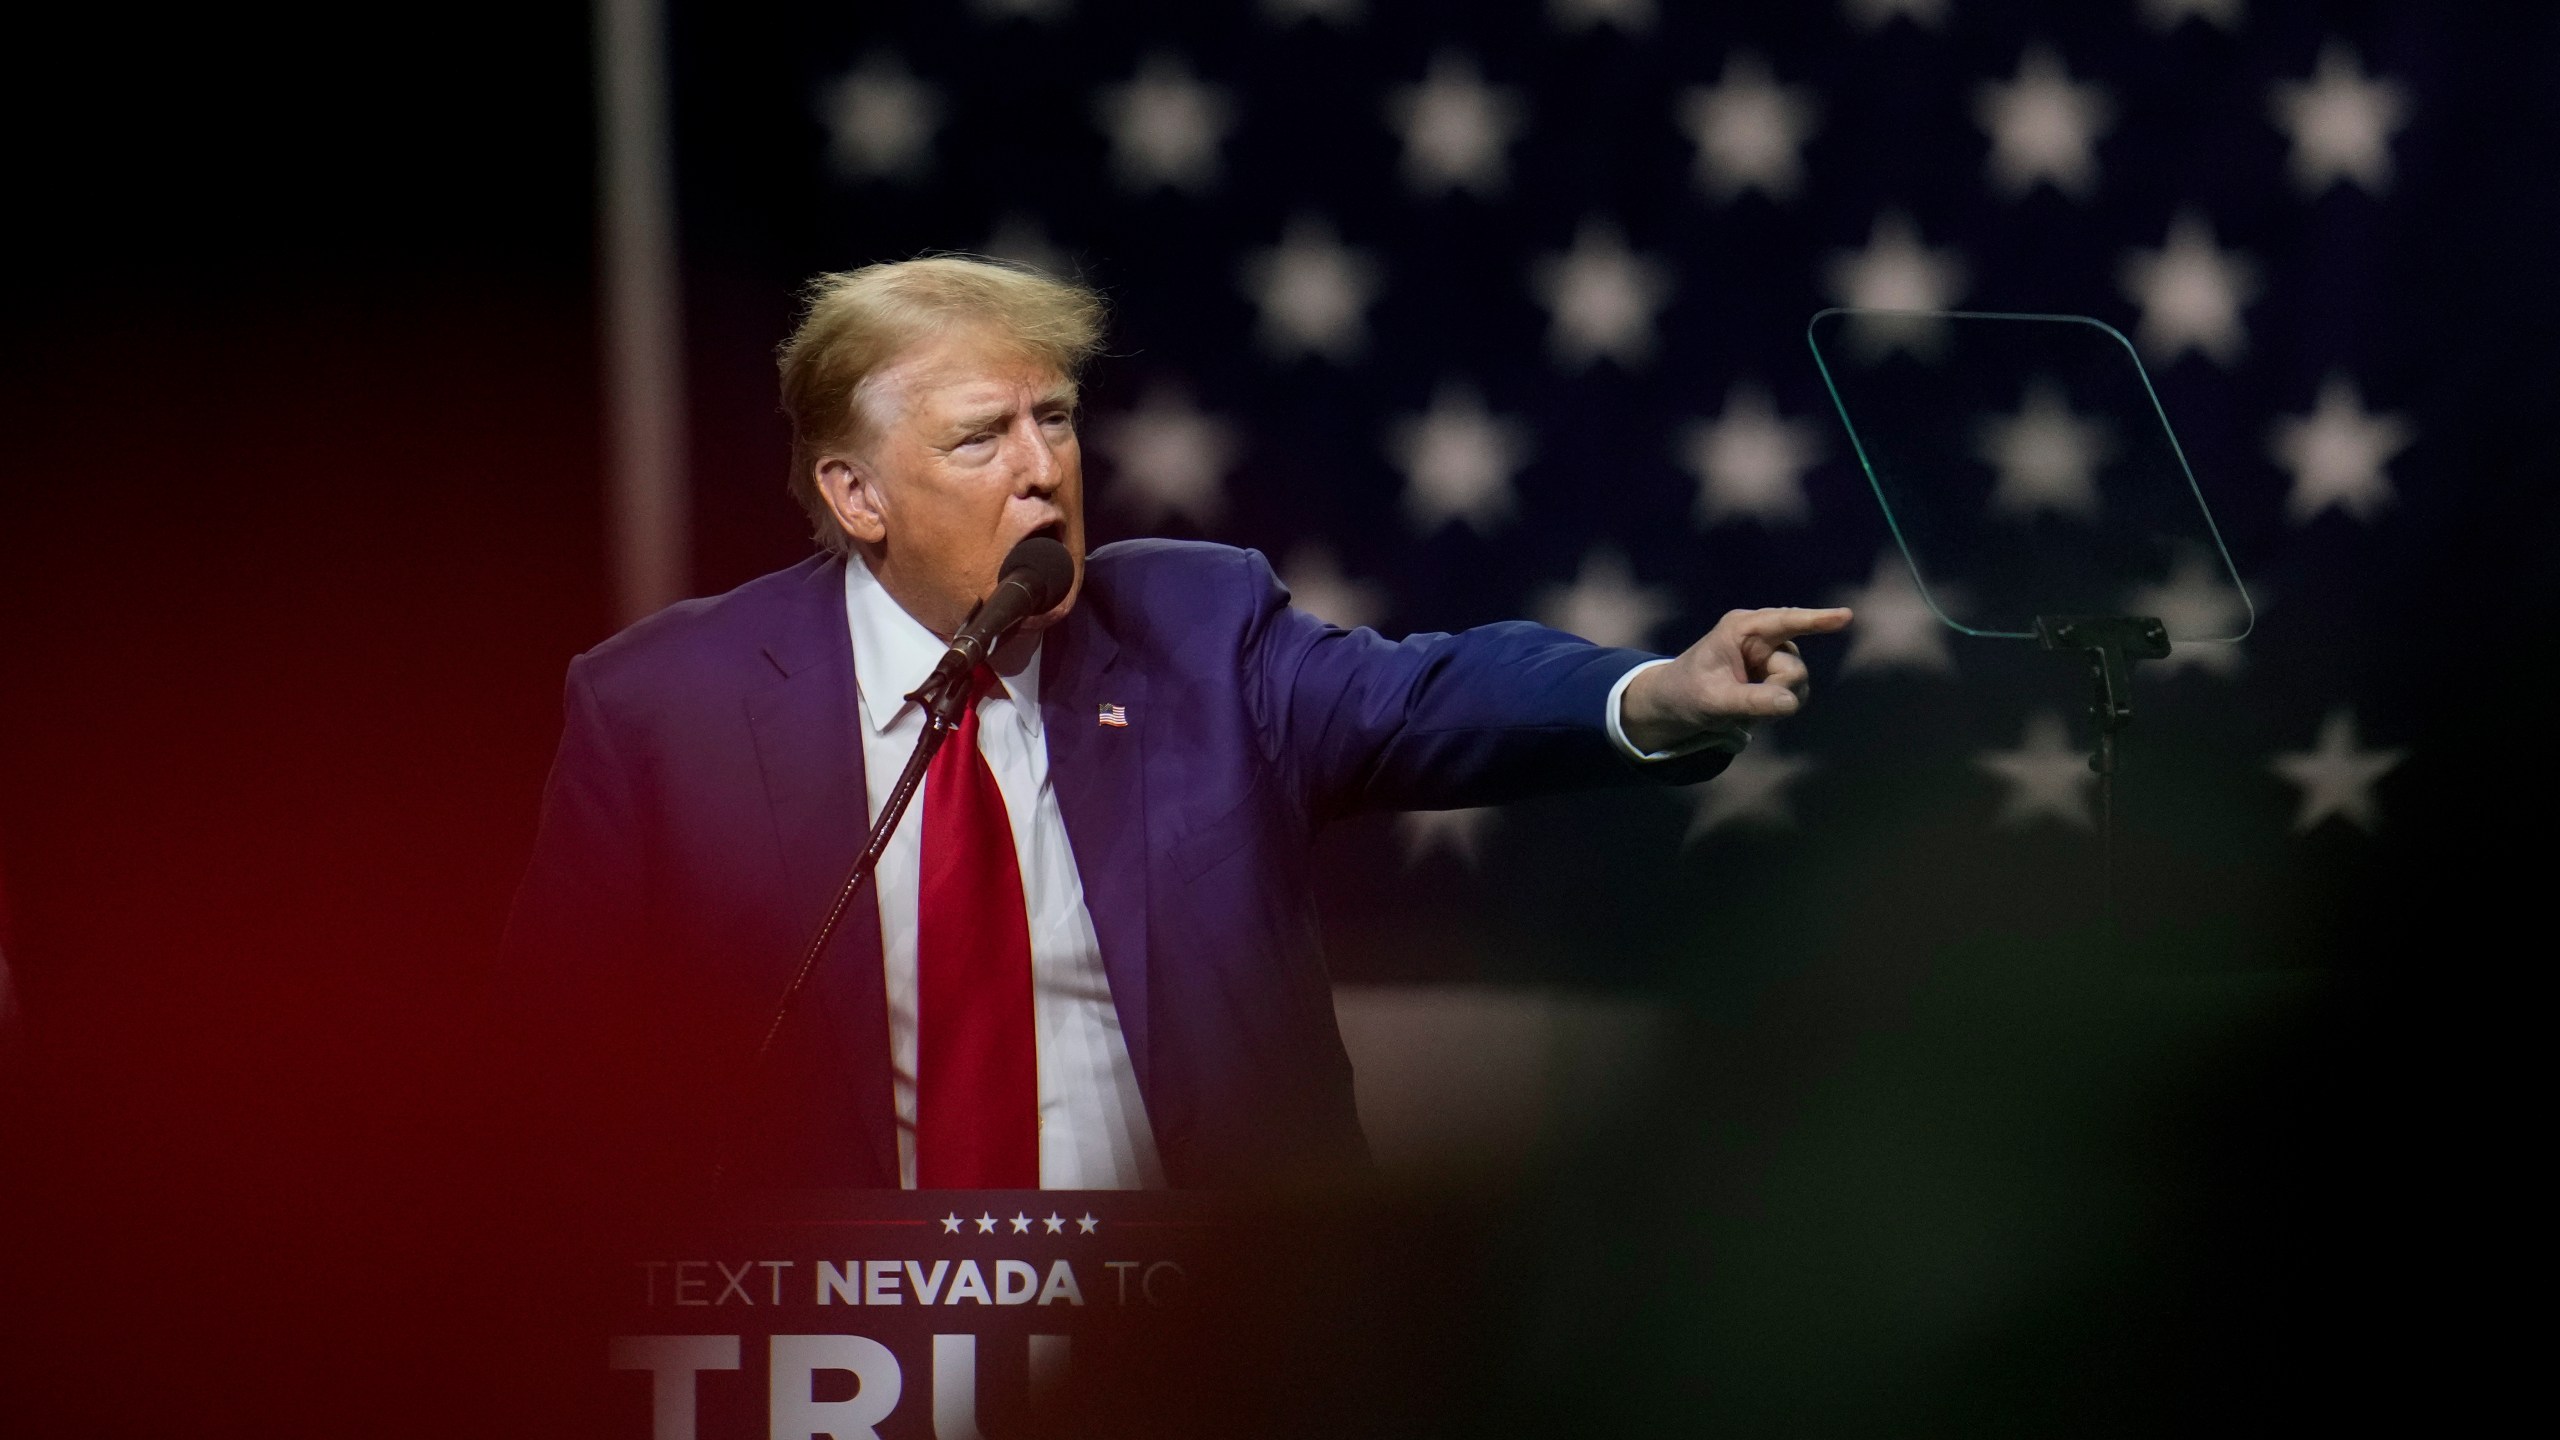 Former President Donald Trump speaks during a rally Sunday, Dec. 17, 2023, in Reno, Nev. (AP Photo/Godofredo A. Vásquez)